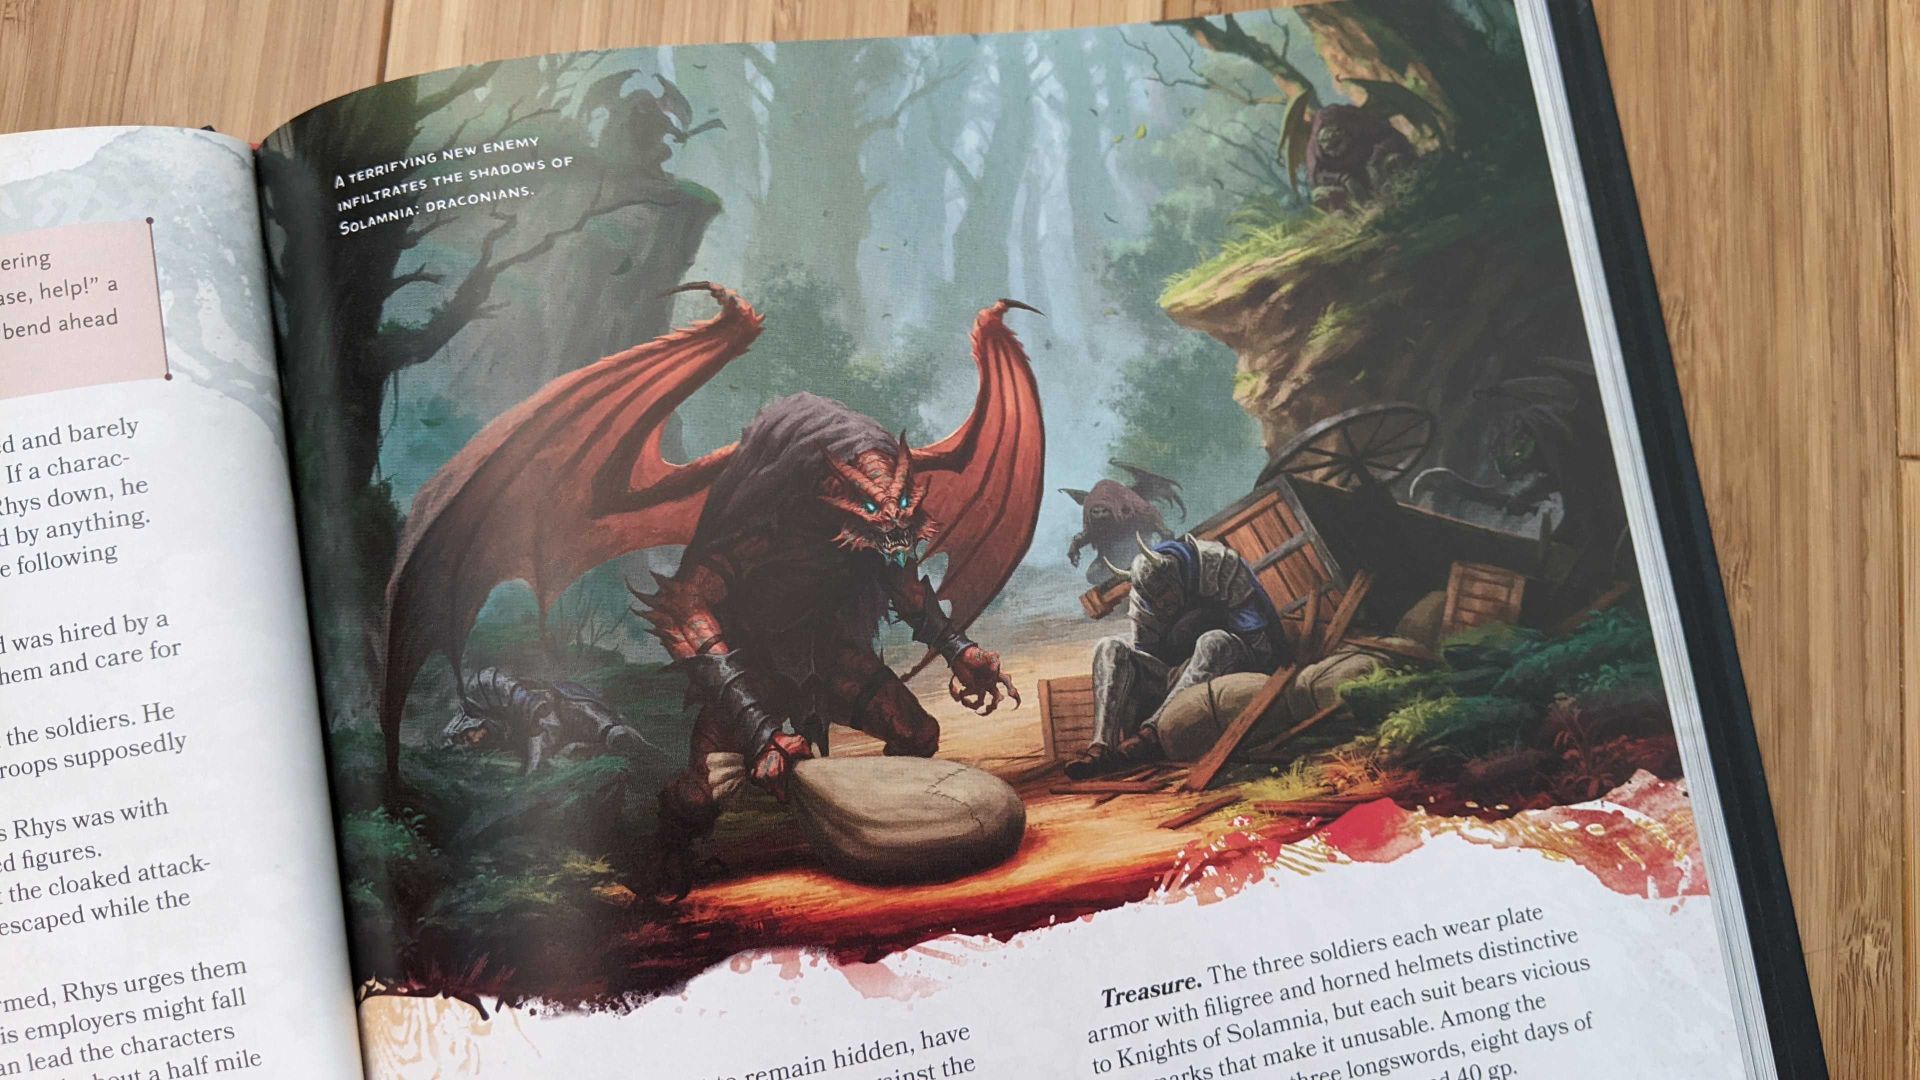 The new dragon enemies present in Dragonlance Shadow of the Dragon Queen